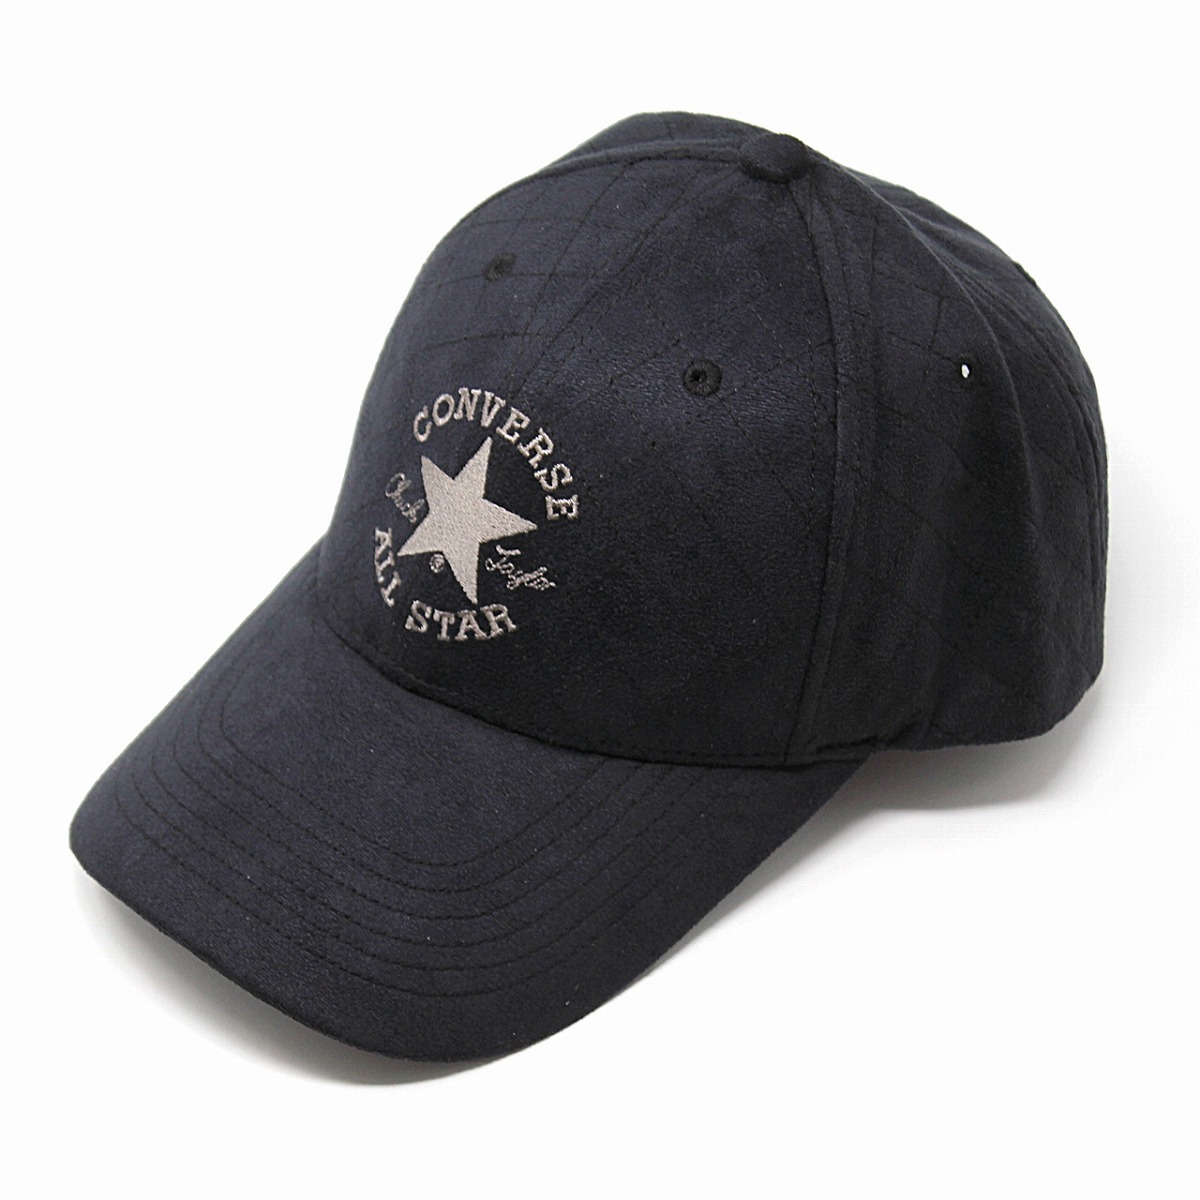 converse all star hat